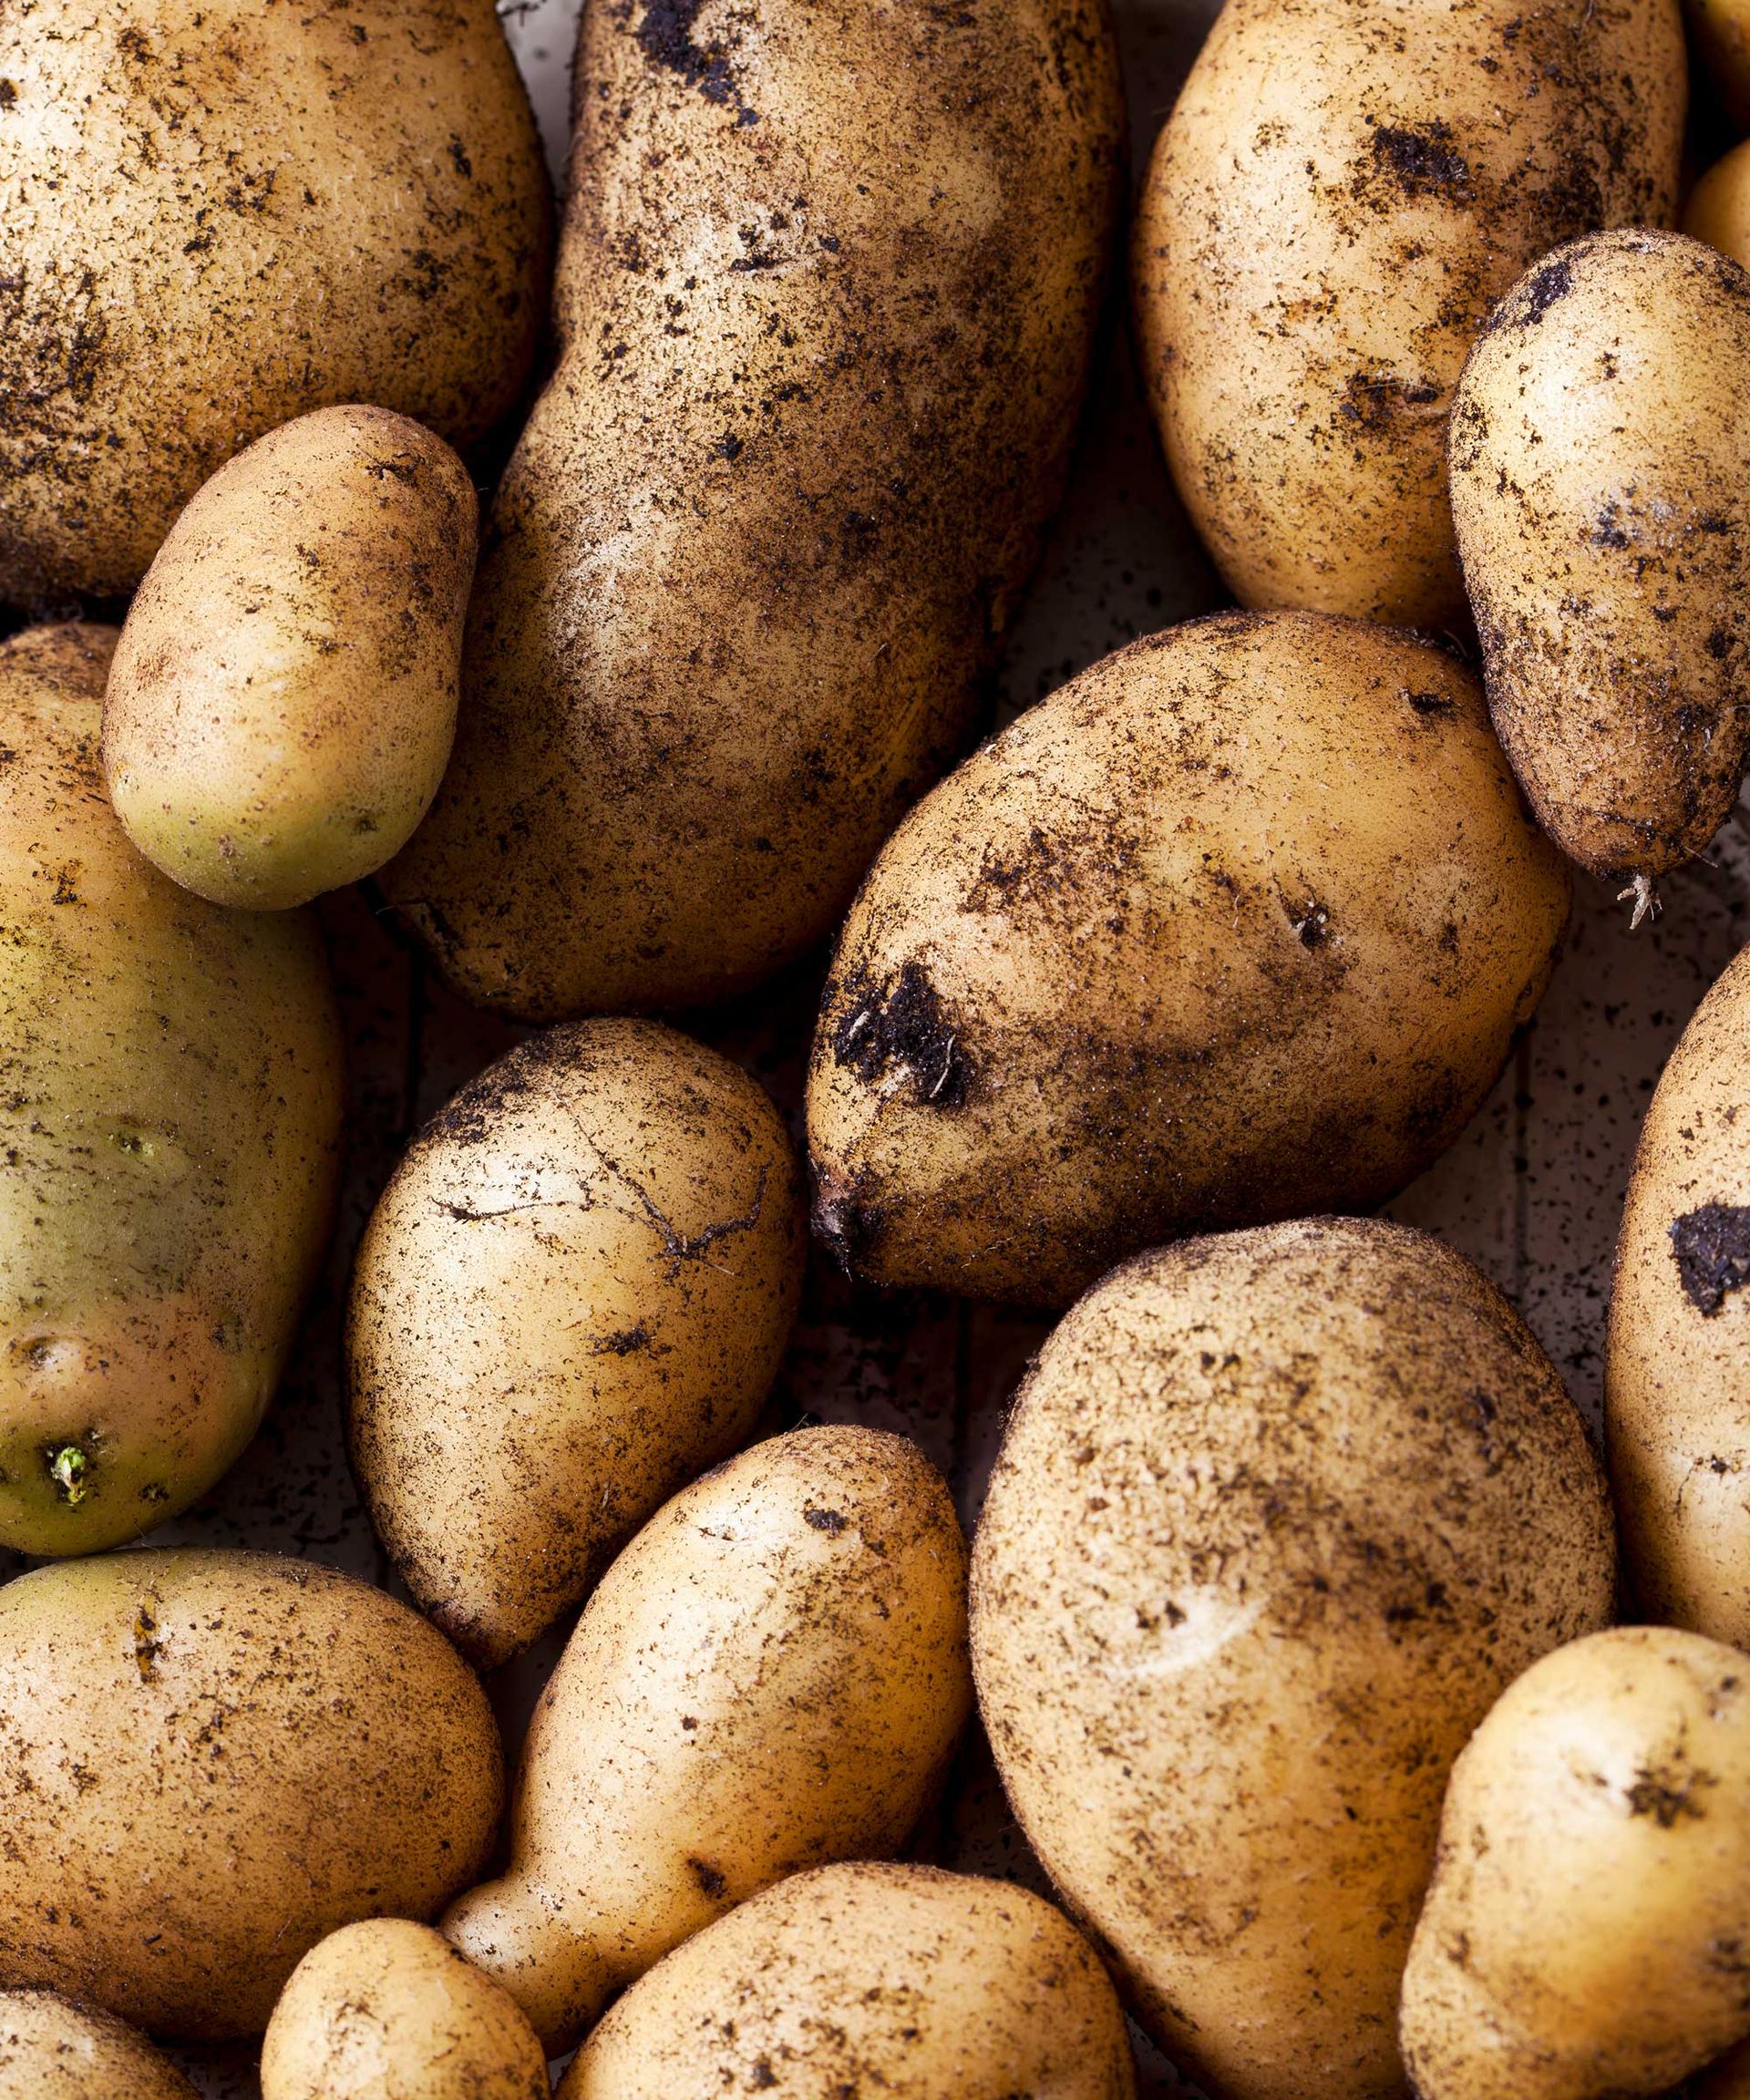 When to harvest potatoes and how to do it properly | Gardeningetc